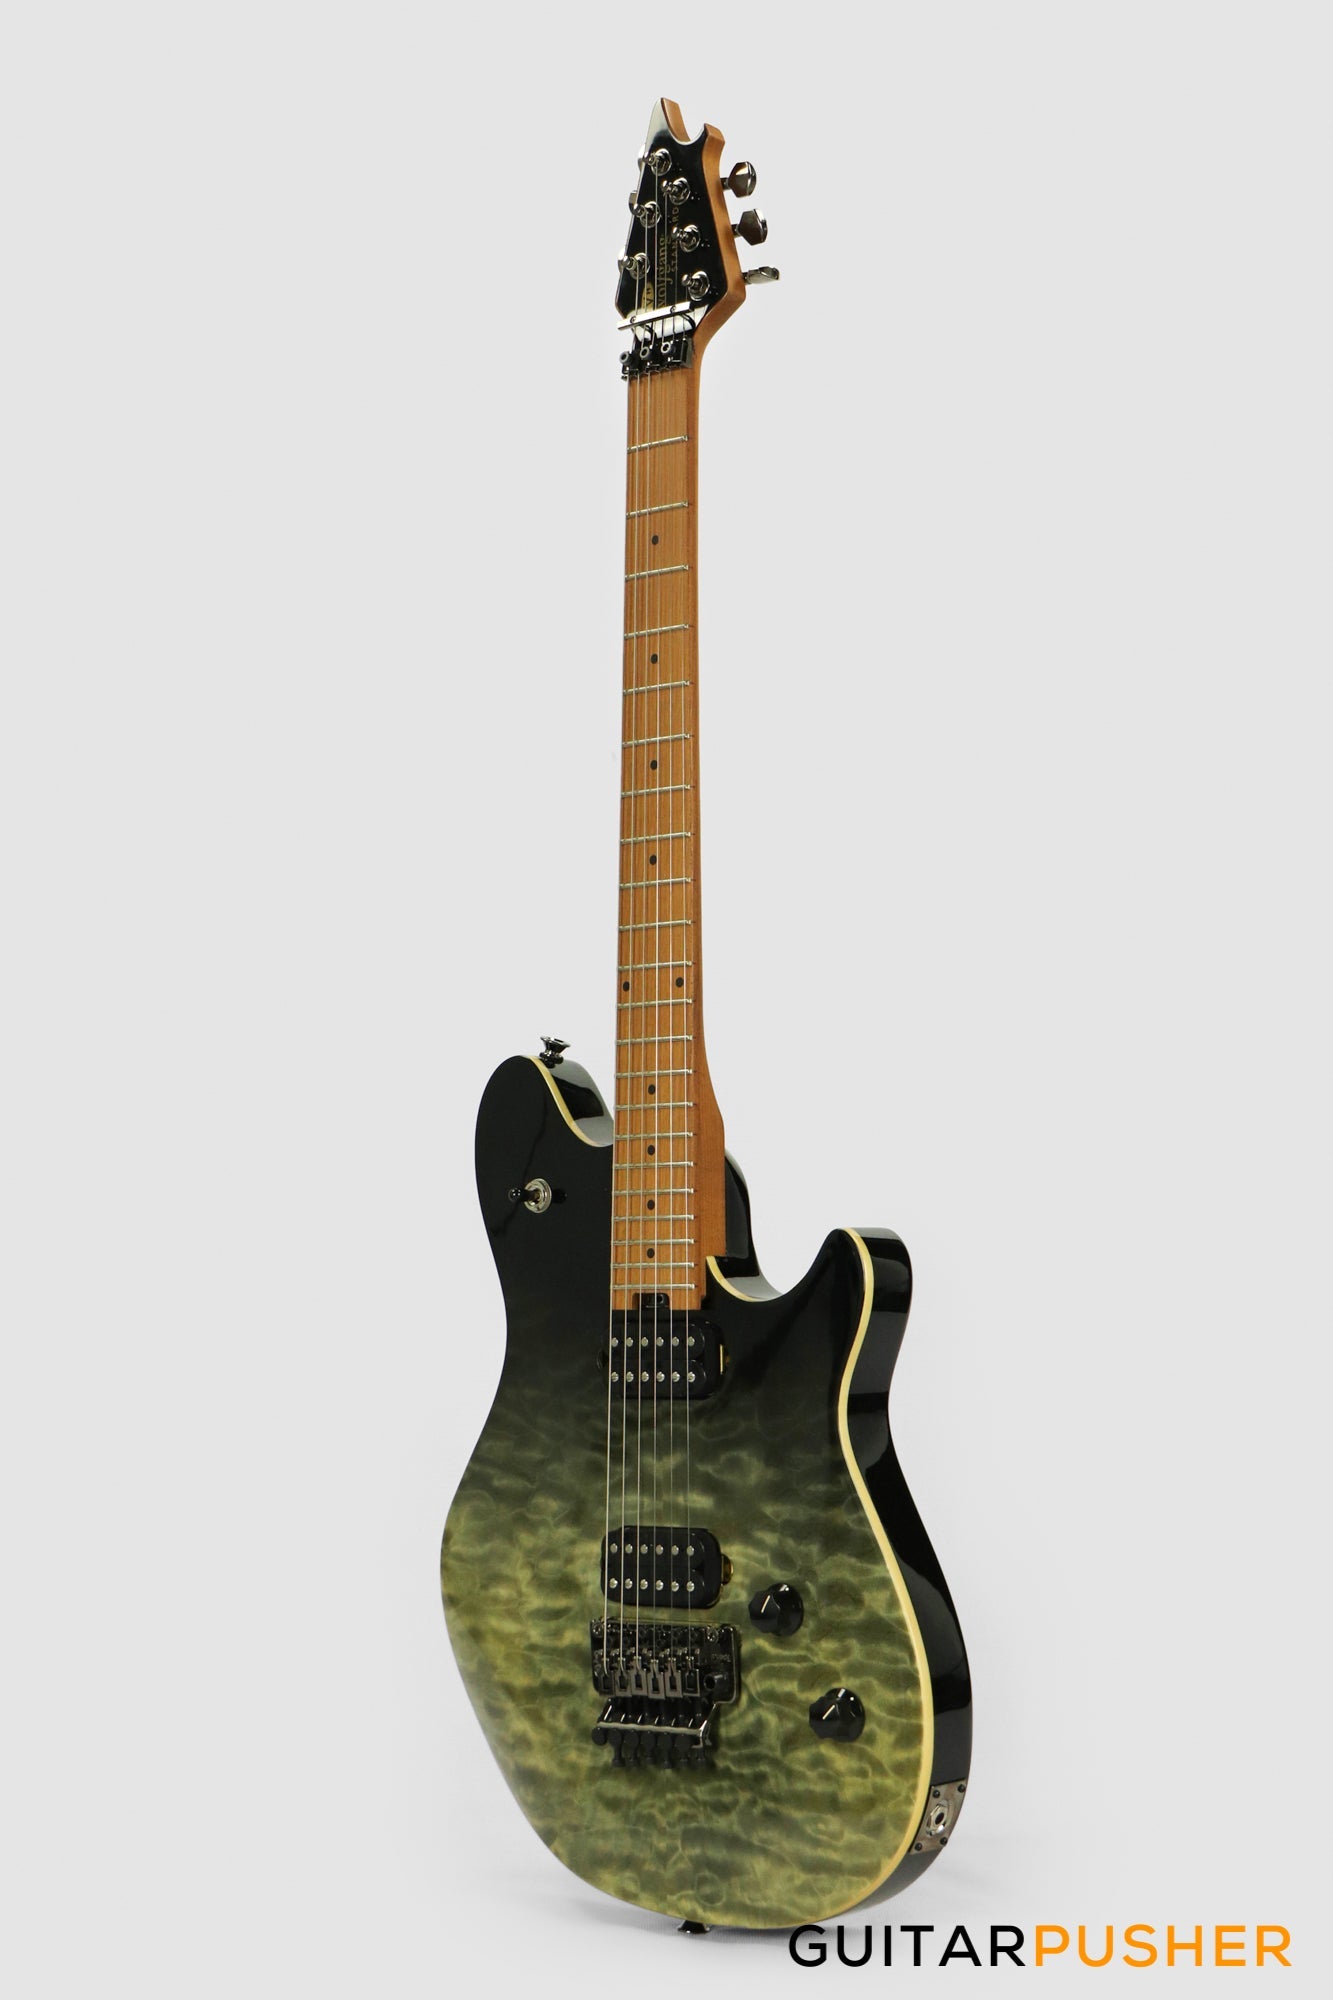 Wolfgang EVH WG QM (Quilted Maple) Standard Electric Guitar - Black Fade